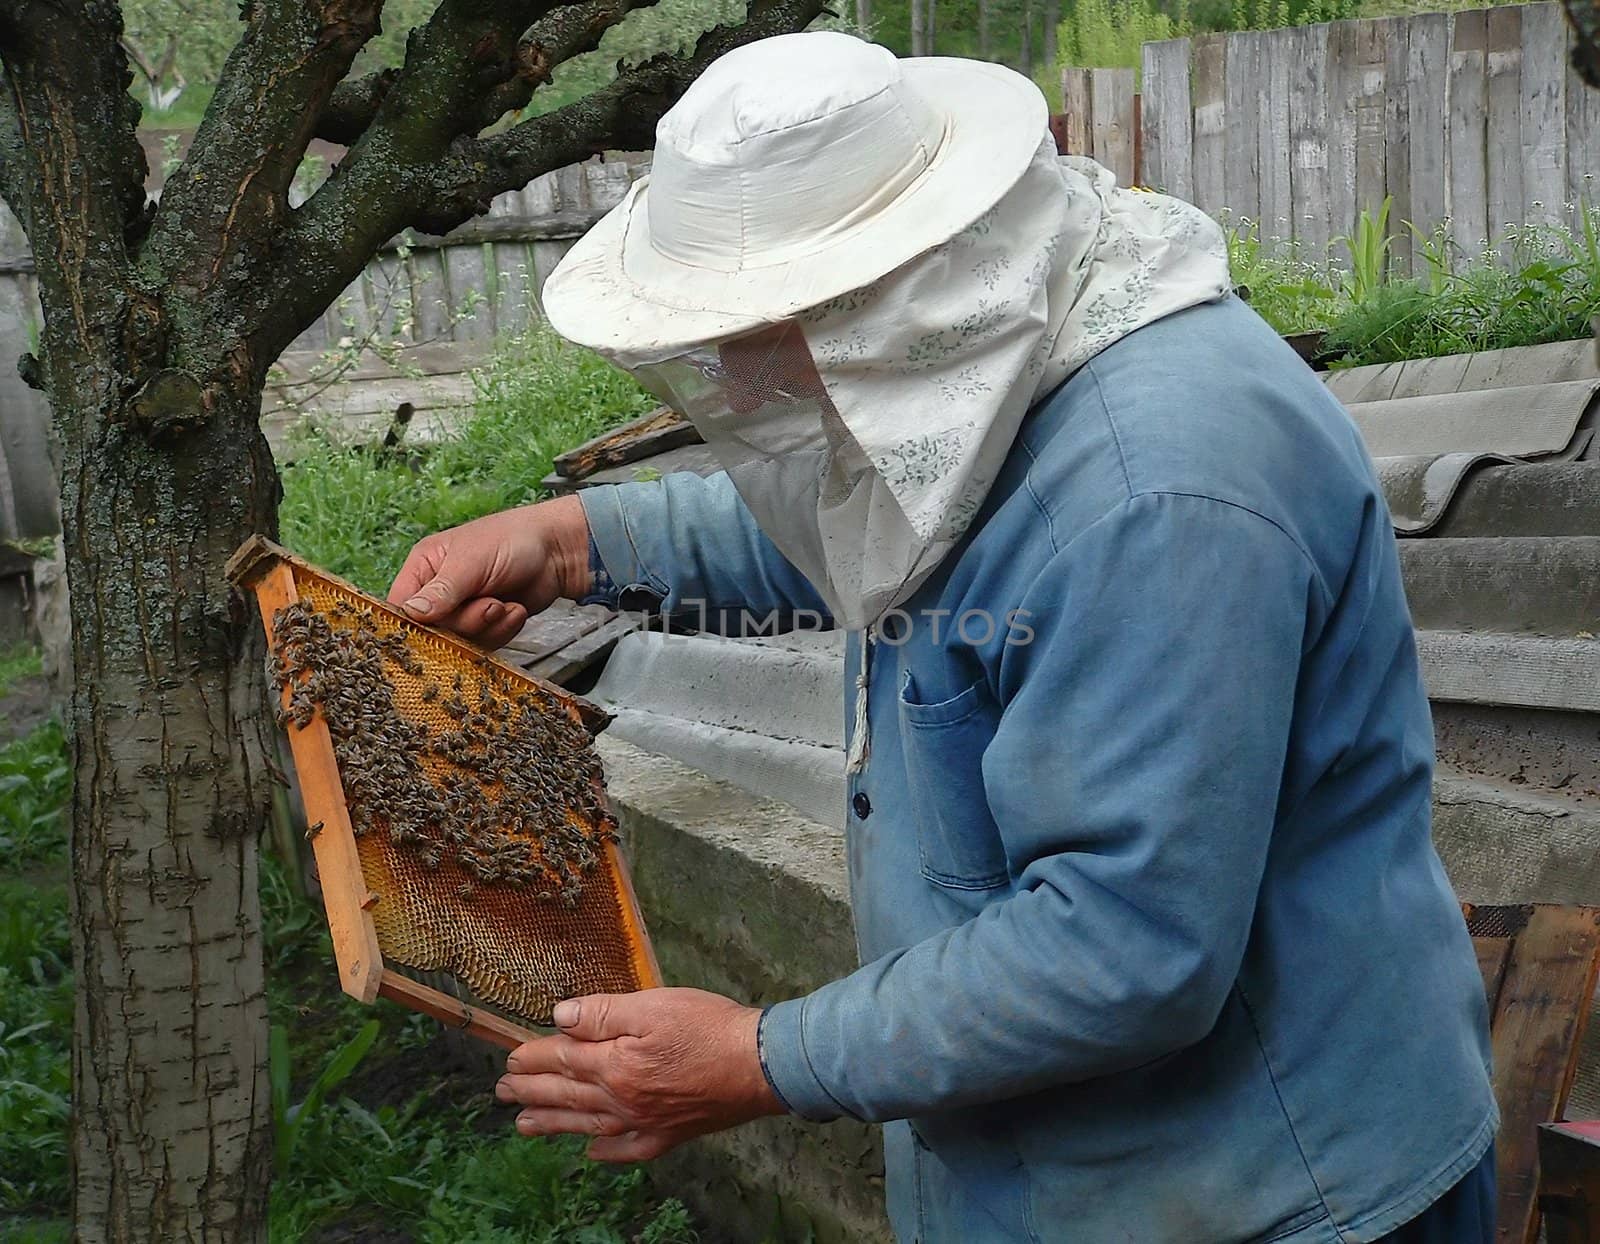 The hiver examines young bees who are actively made multiple copies in the beginning of May.

